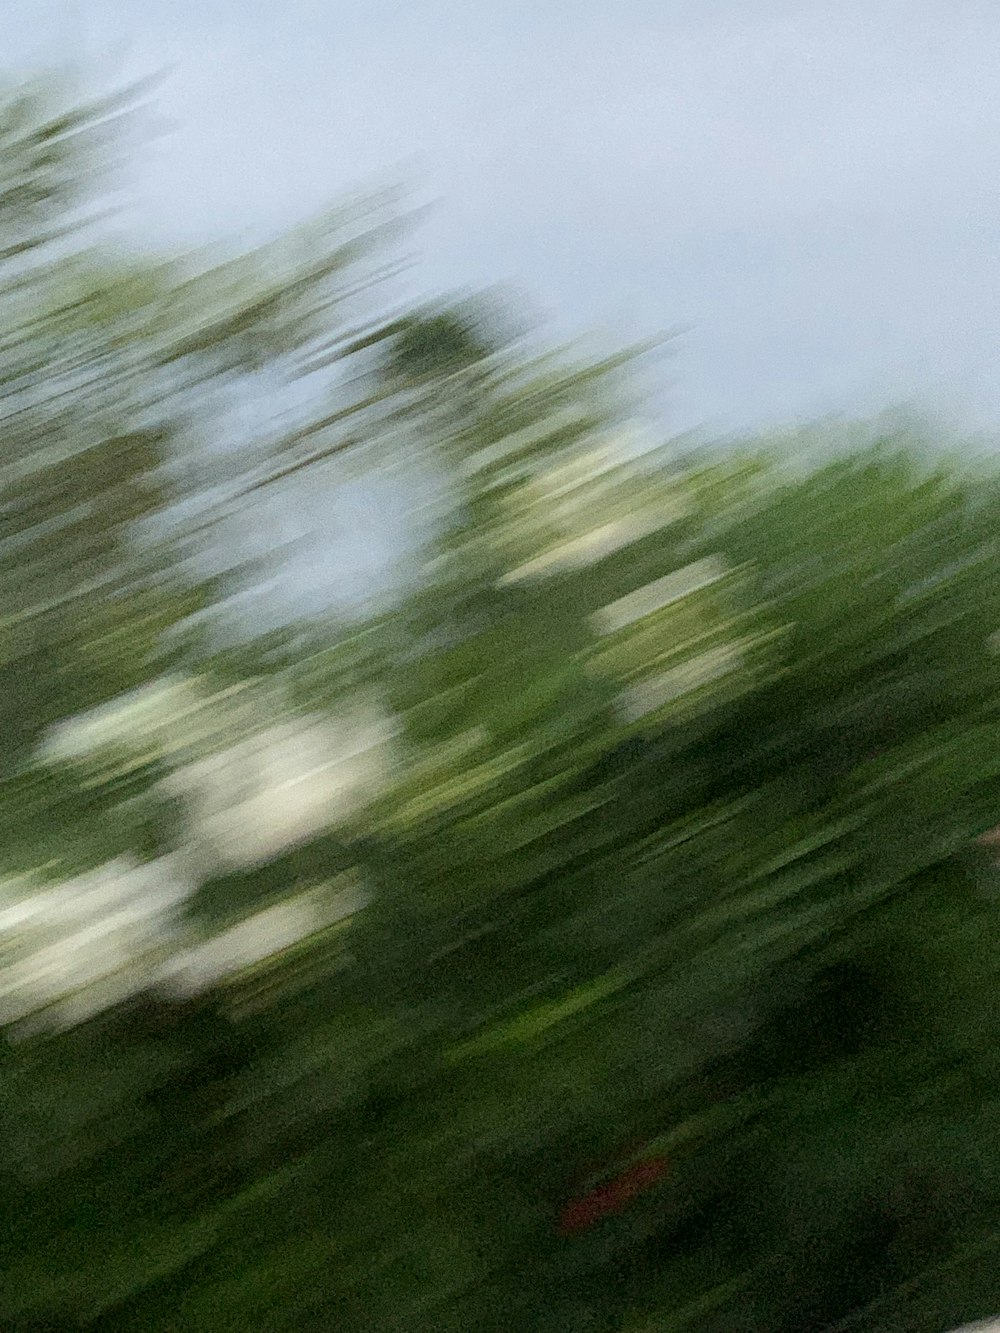 a blurry photo of a person riding a skateboard